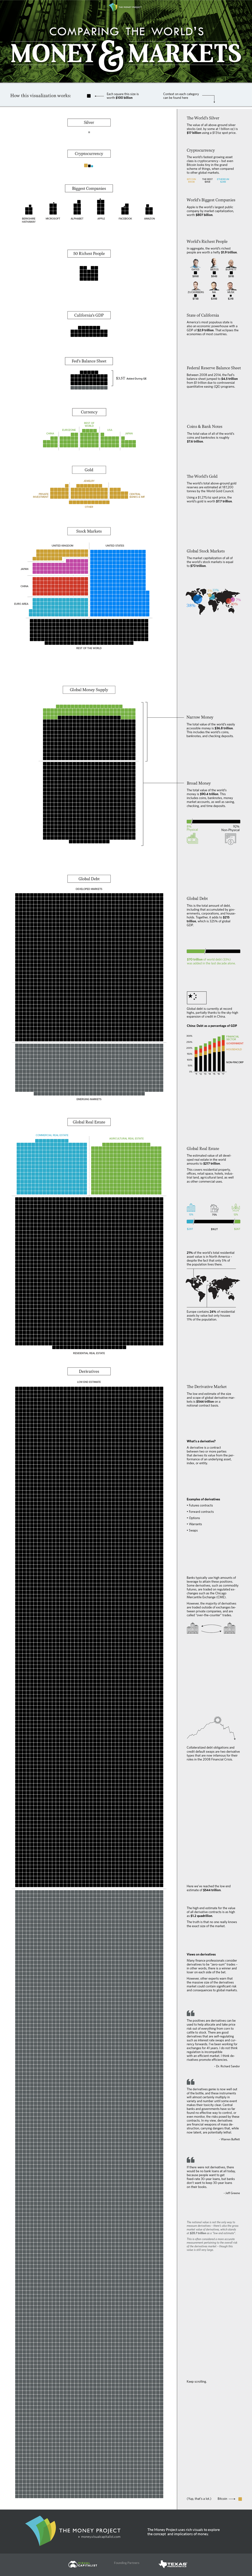 all-the-worlds-money-mp-infographic-1360.png